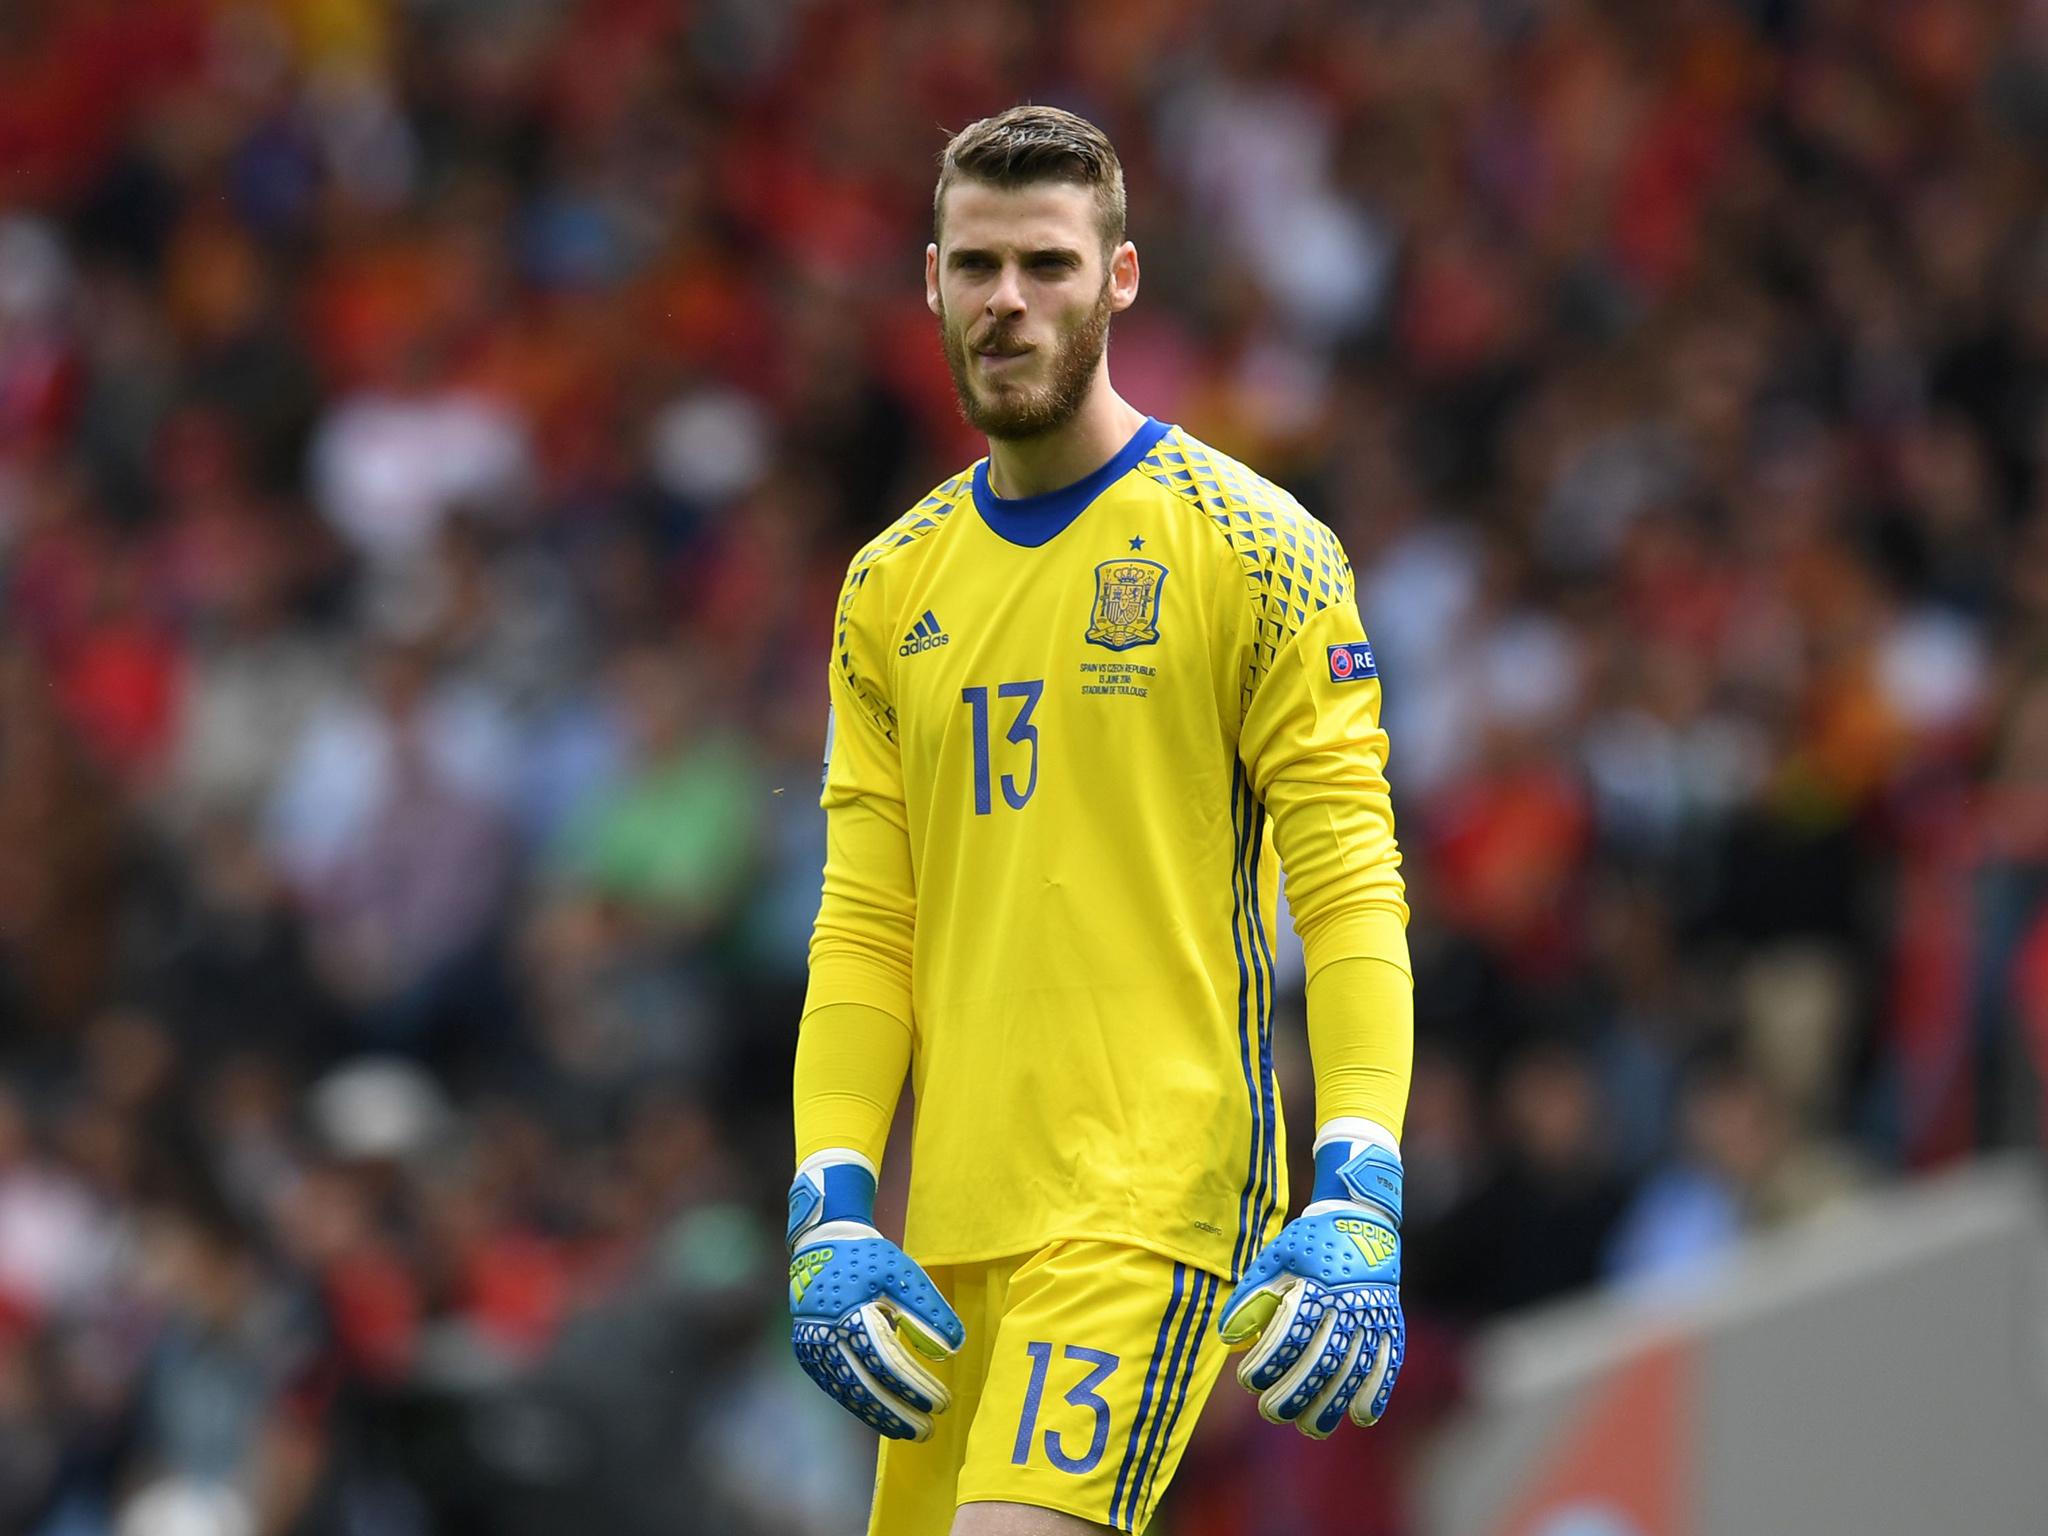 De Gea's implication in an ongoing trial threatened to derail his tournament